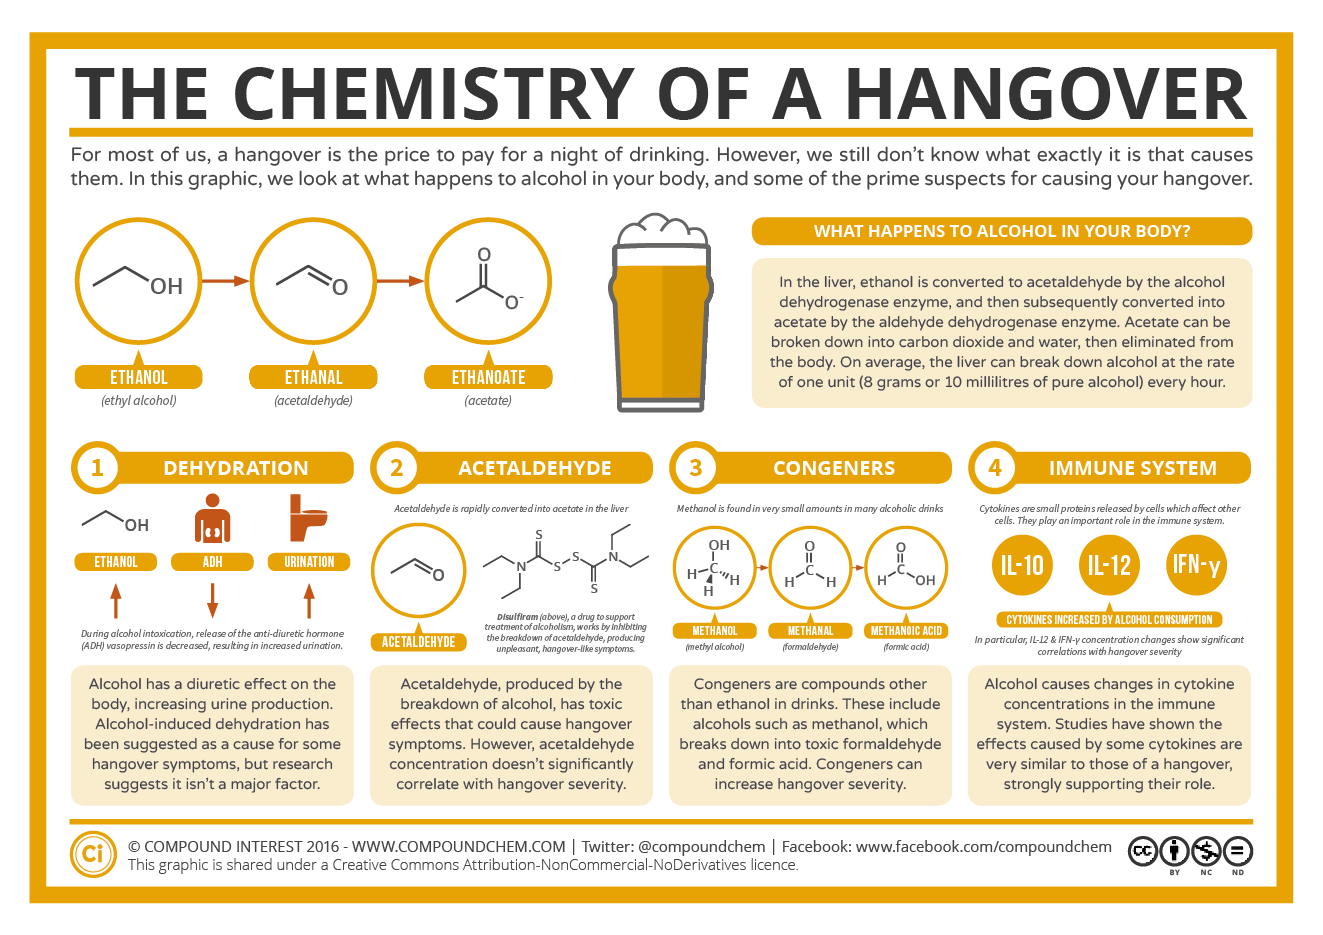 Image displaying the chemistry behind a hangover